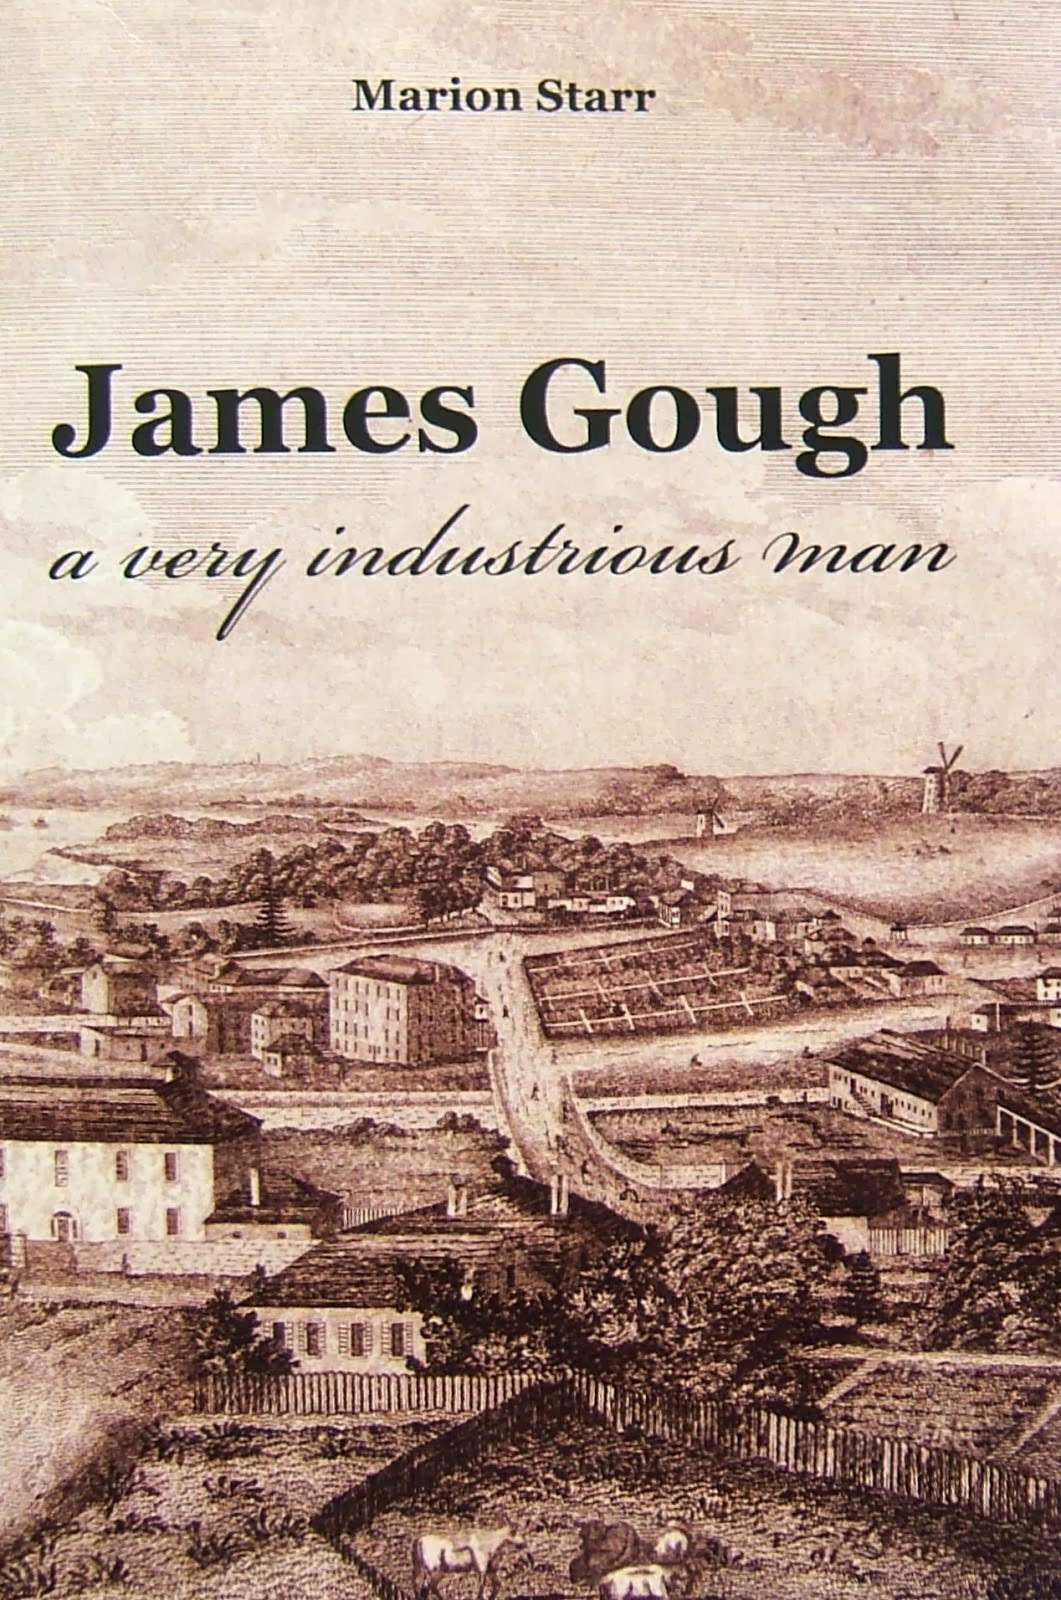 James Gough - the book Click on image for details